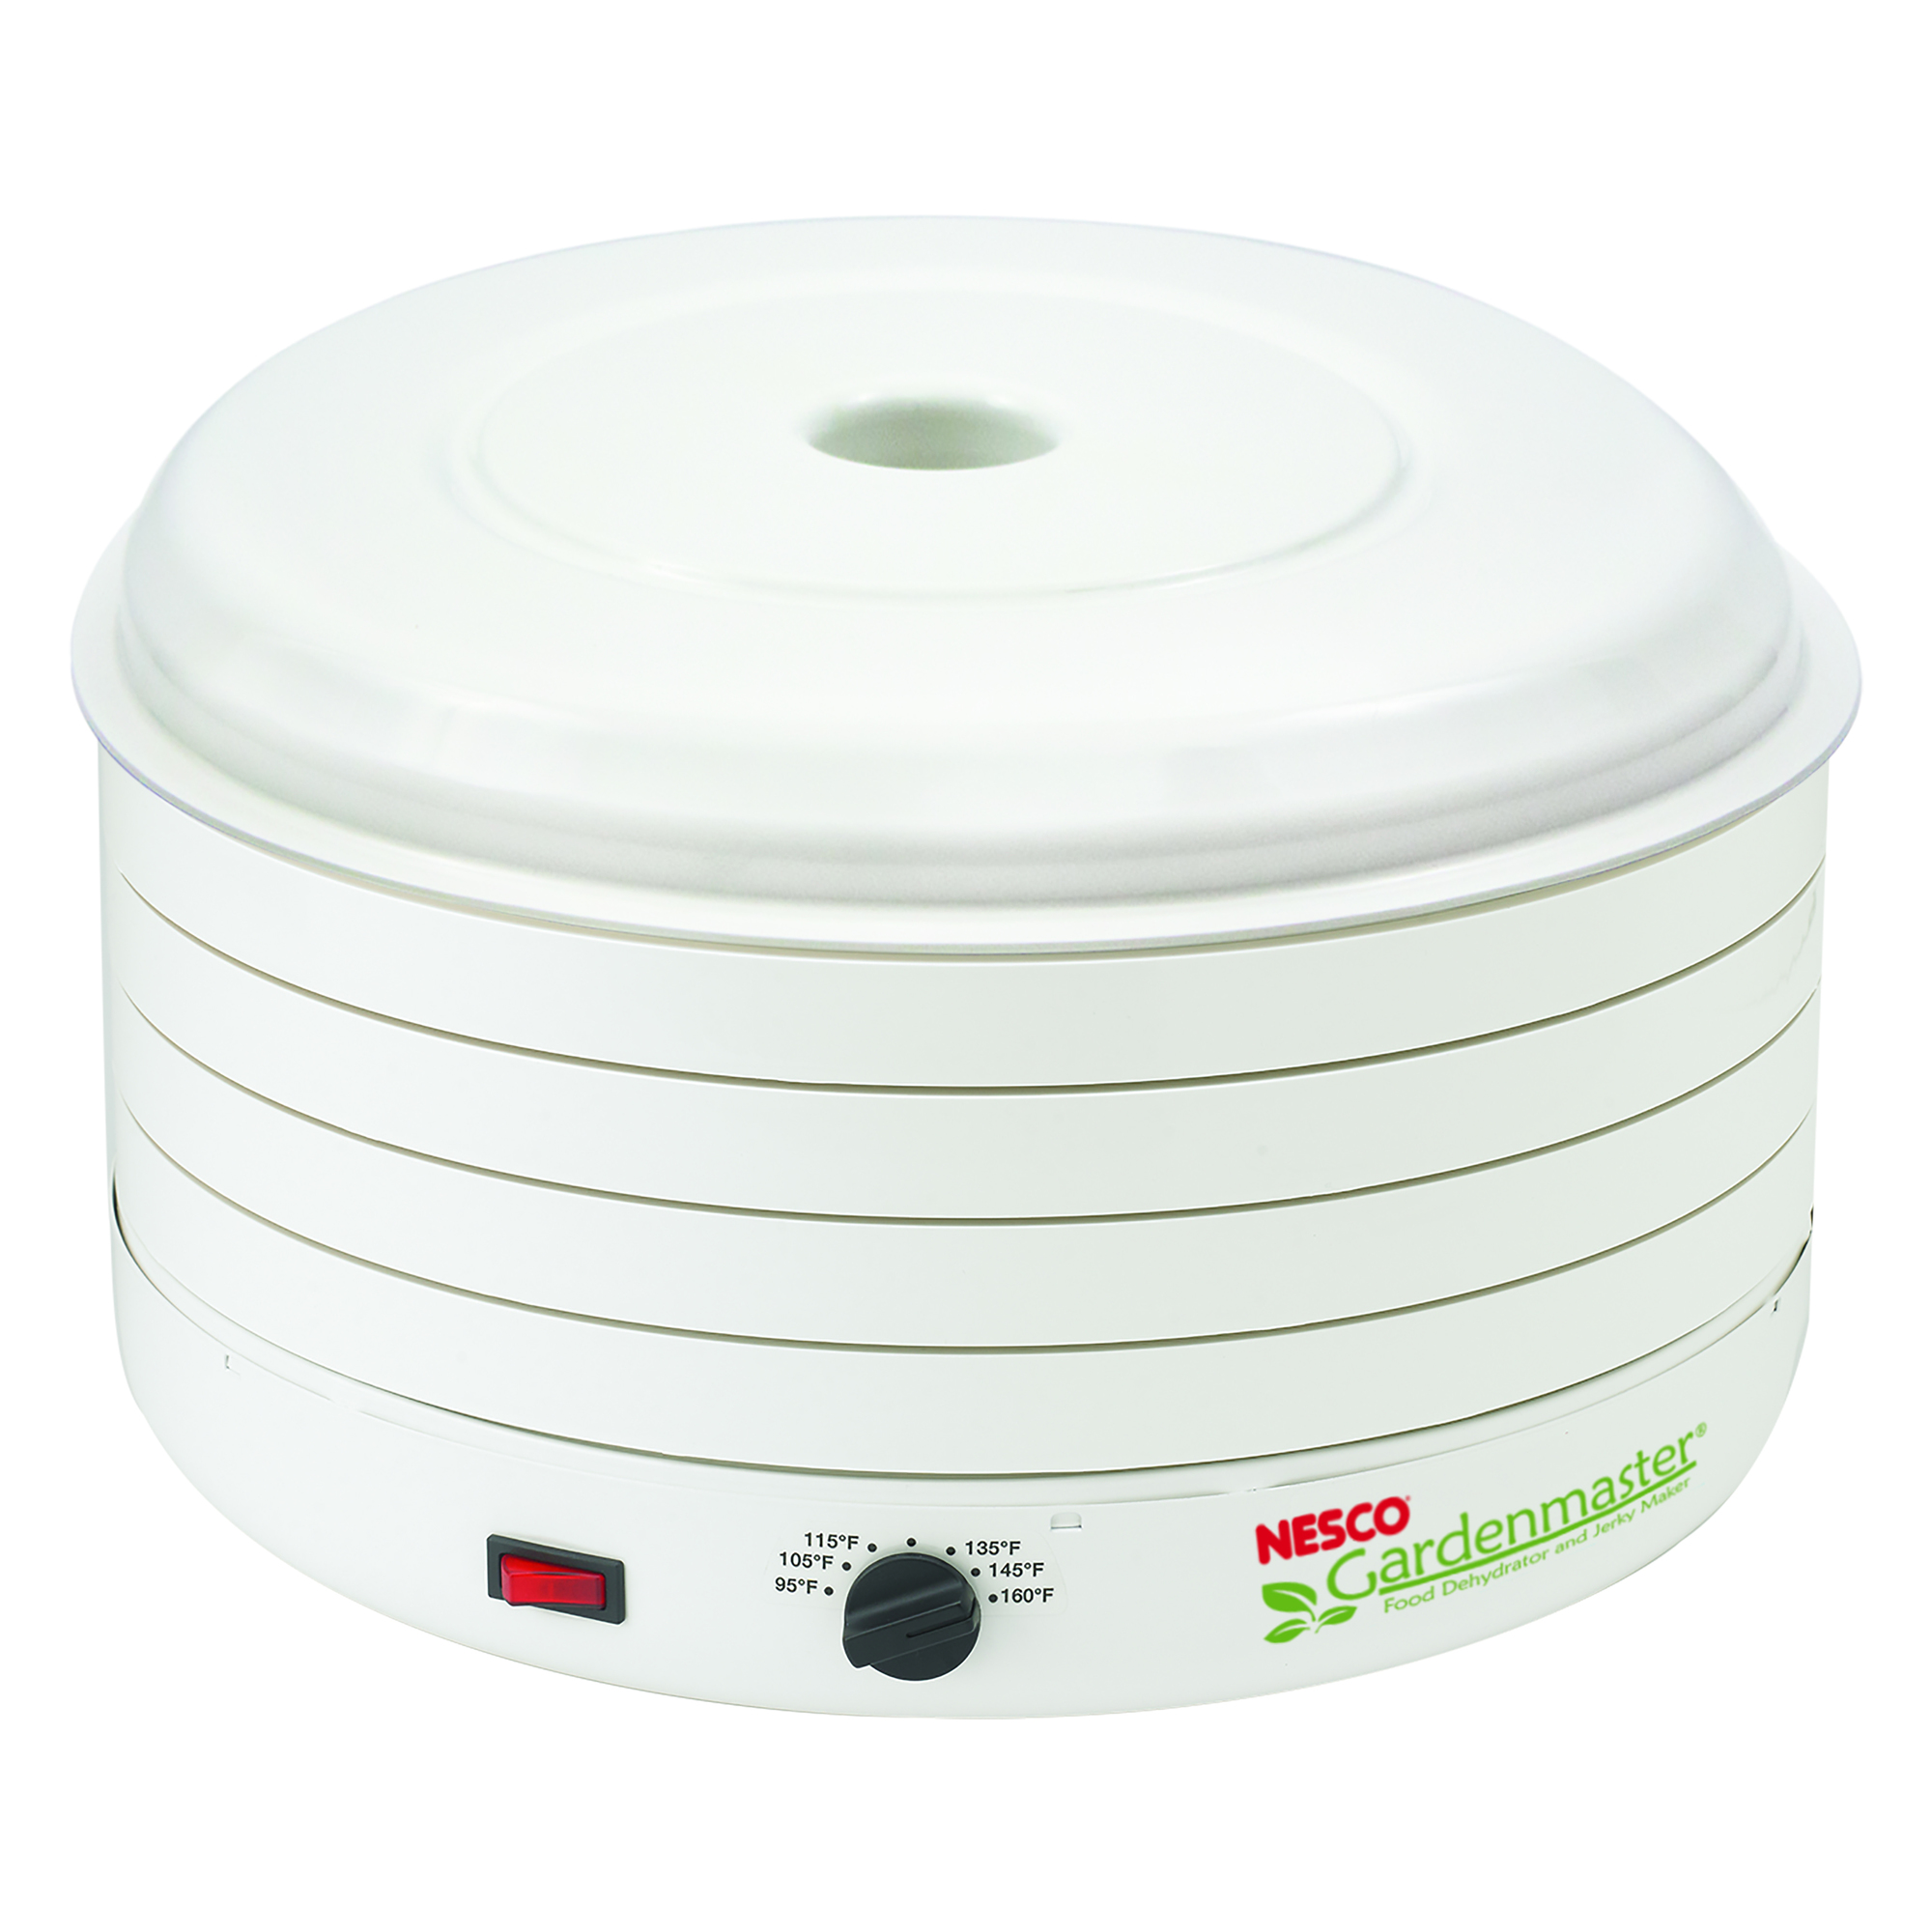 Nesco, Gardenmaster Pro Food Dehydrator, Trays Included (qty.) 4, Primary Color White, Watts 1000, Model FD-1010